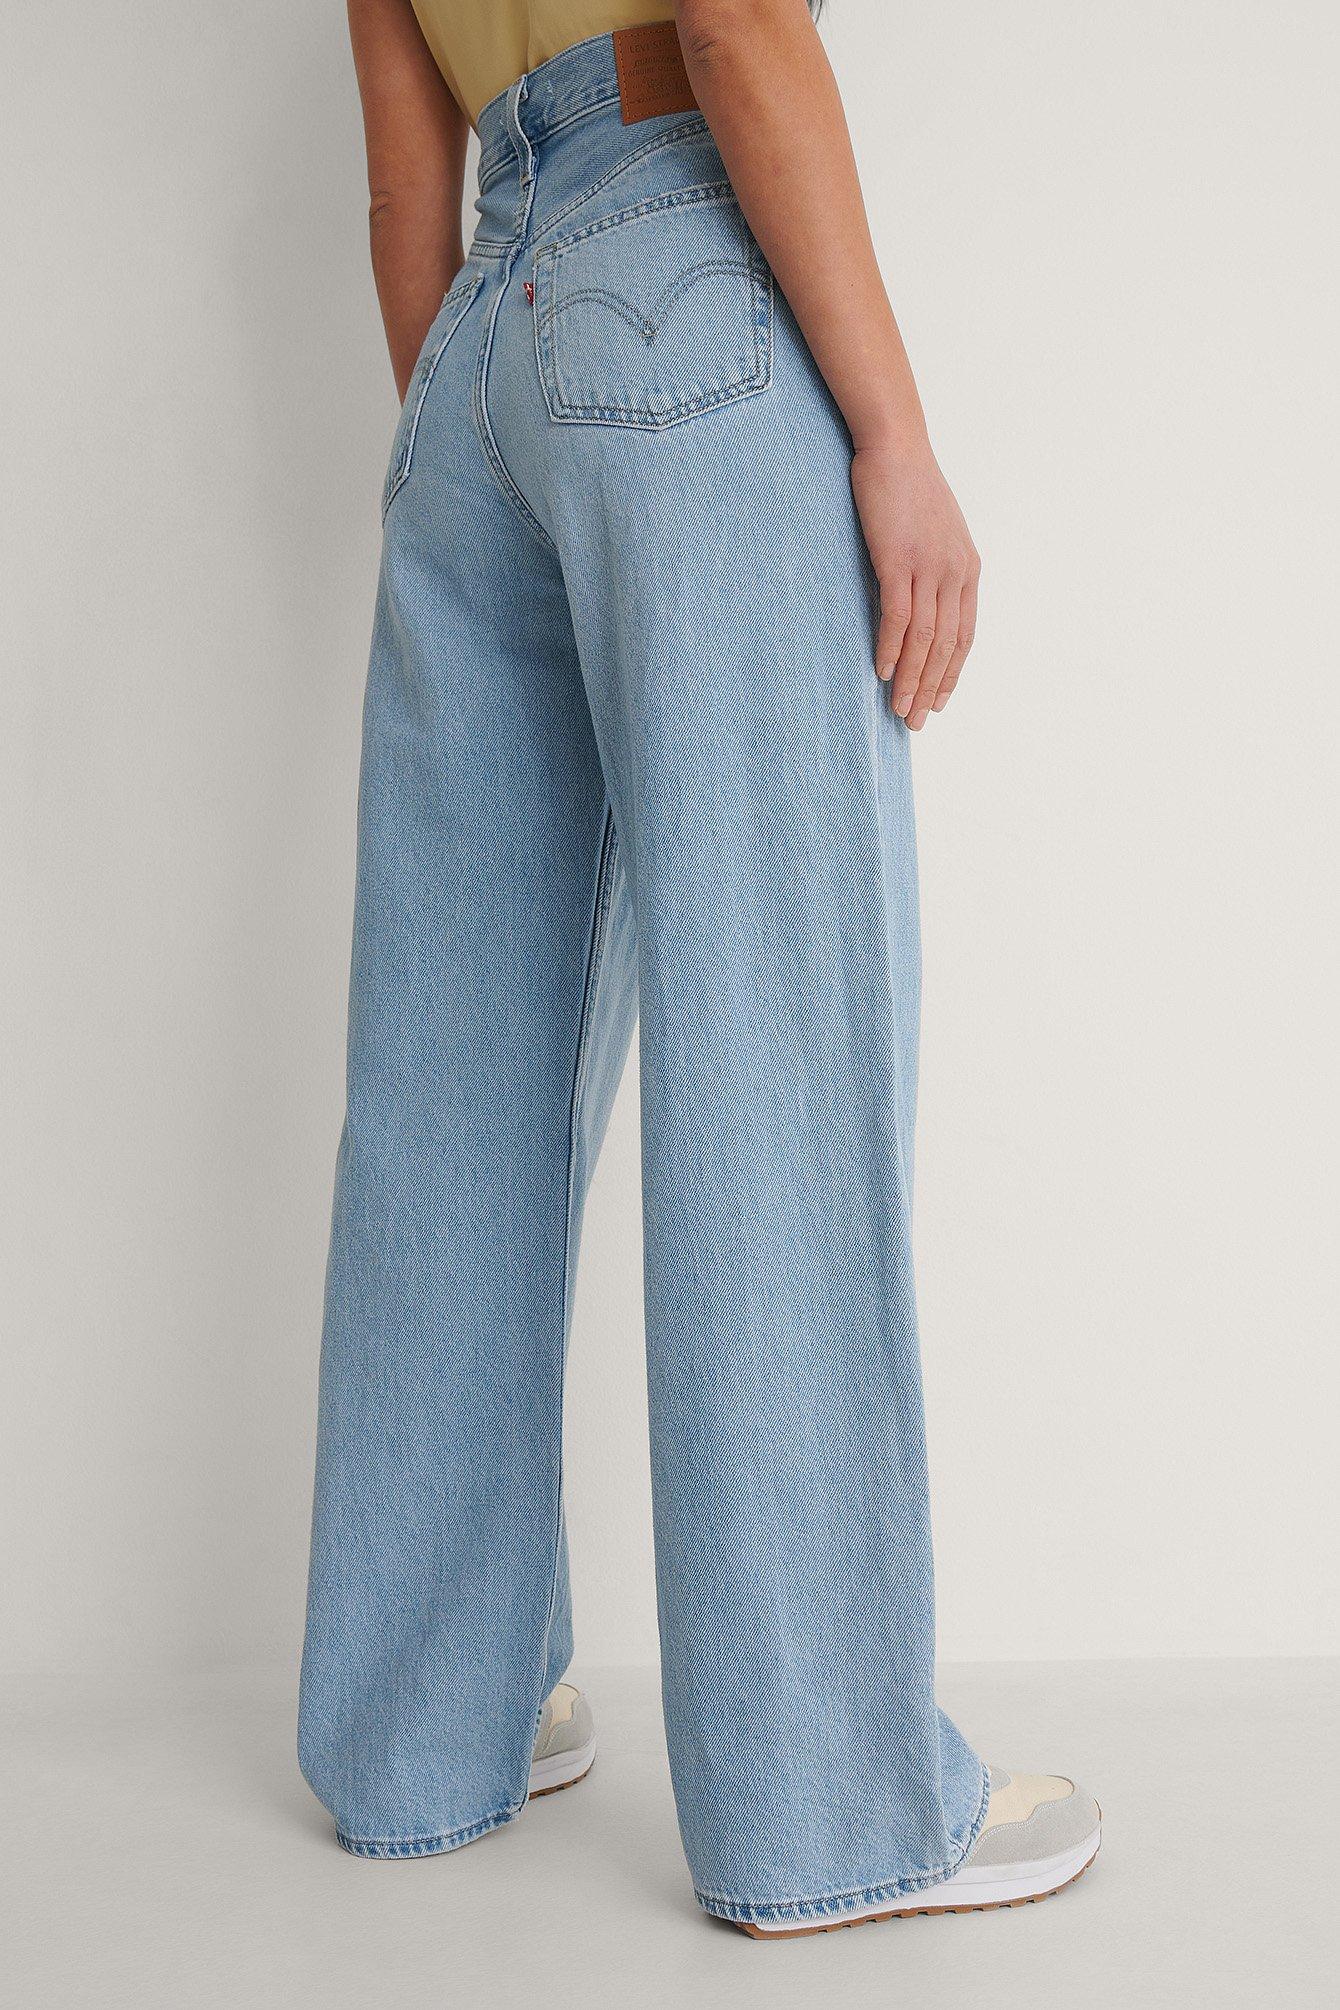 Levi's Blue High Loose Full Circle Jeans | Lyst